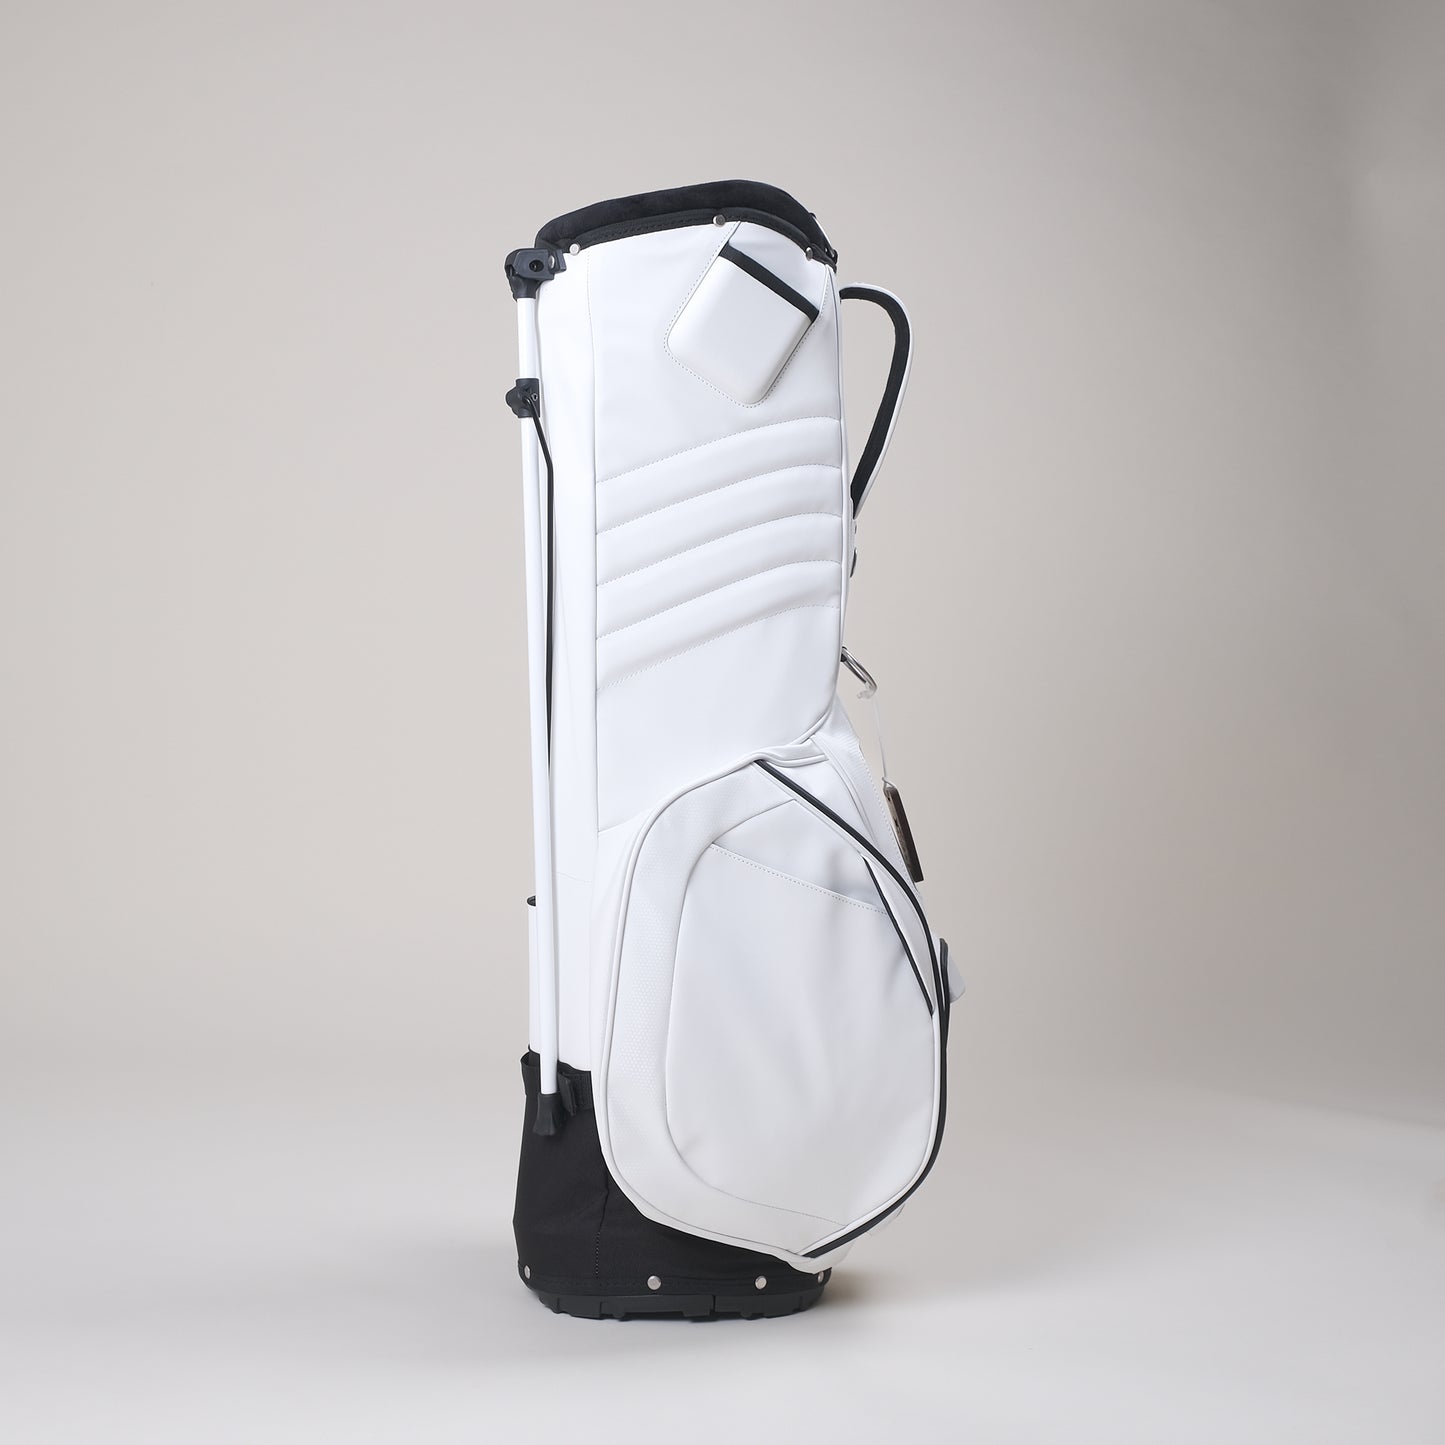 Side view of white MNML GOLF bag displaying phone pocket for filming, extra storage magnetic pockets, standing golf bag and handle. 